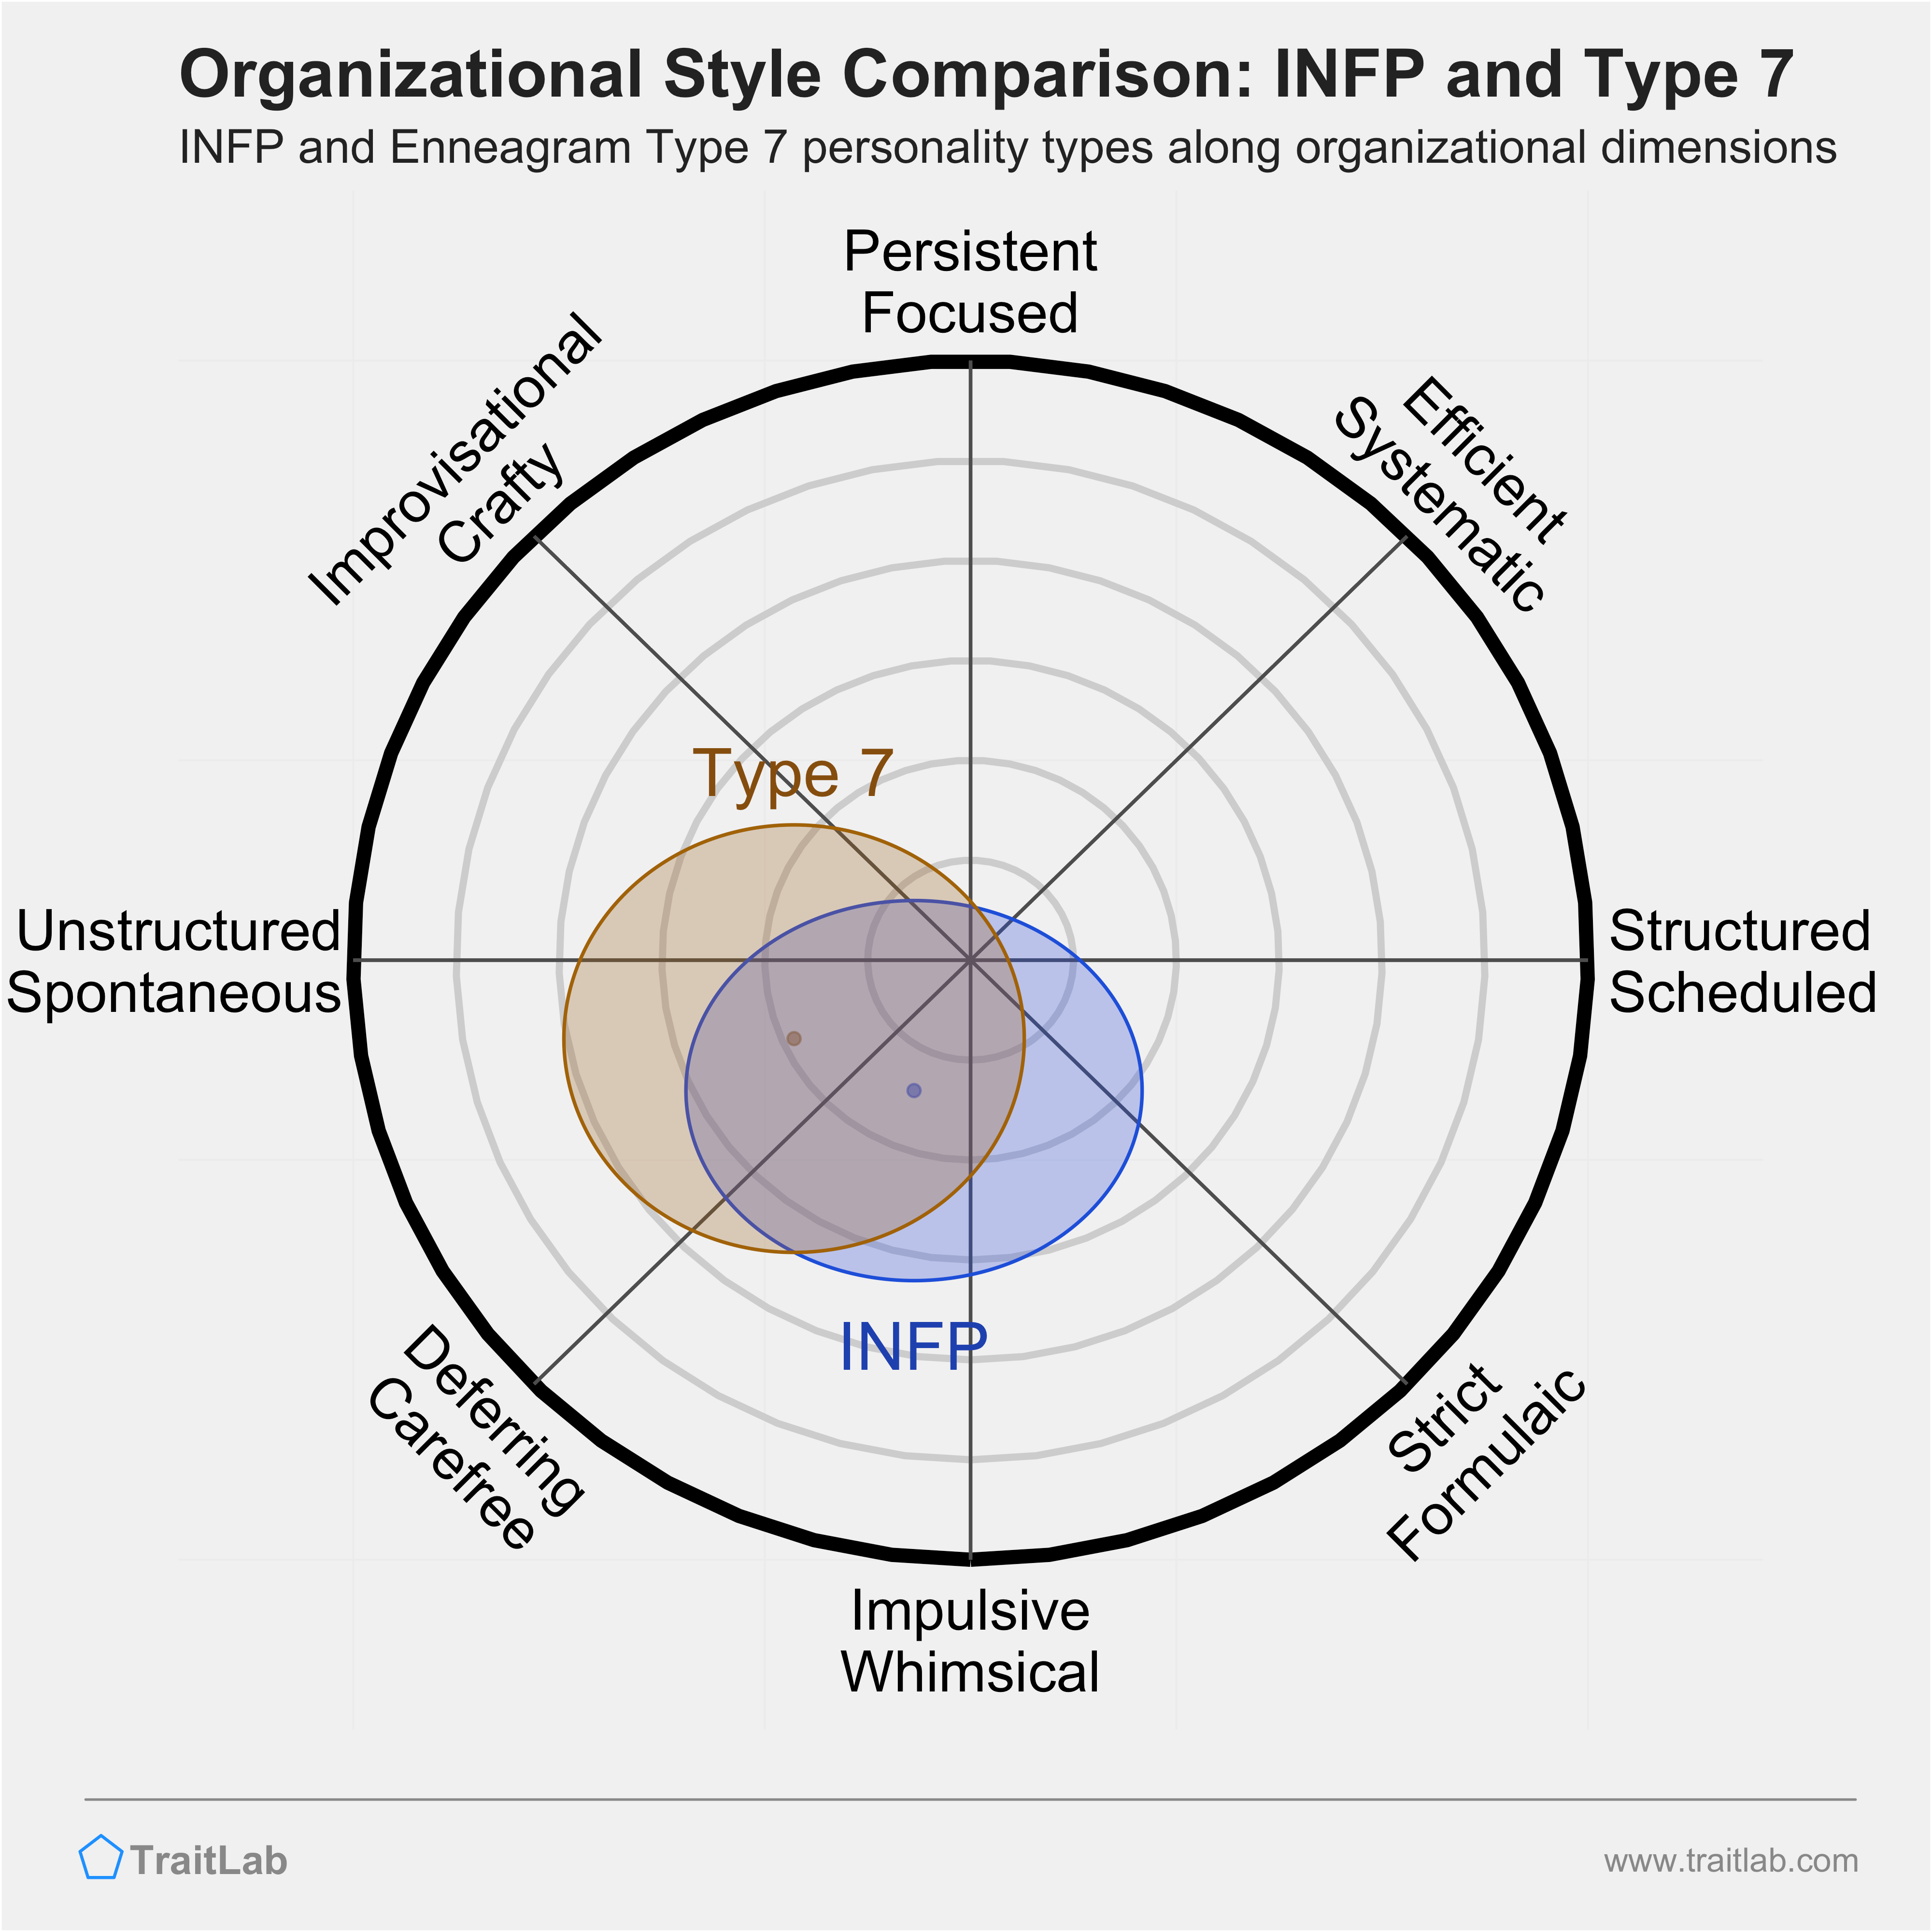 INFP and Type 7 comparison across organizational dimensions